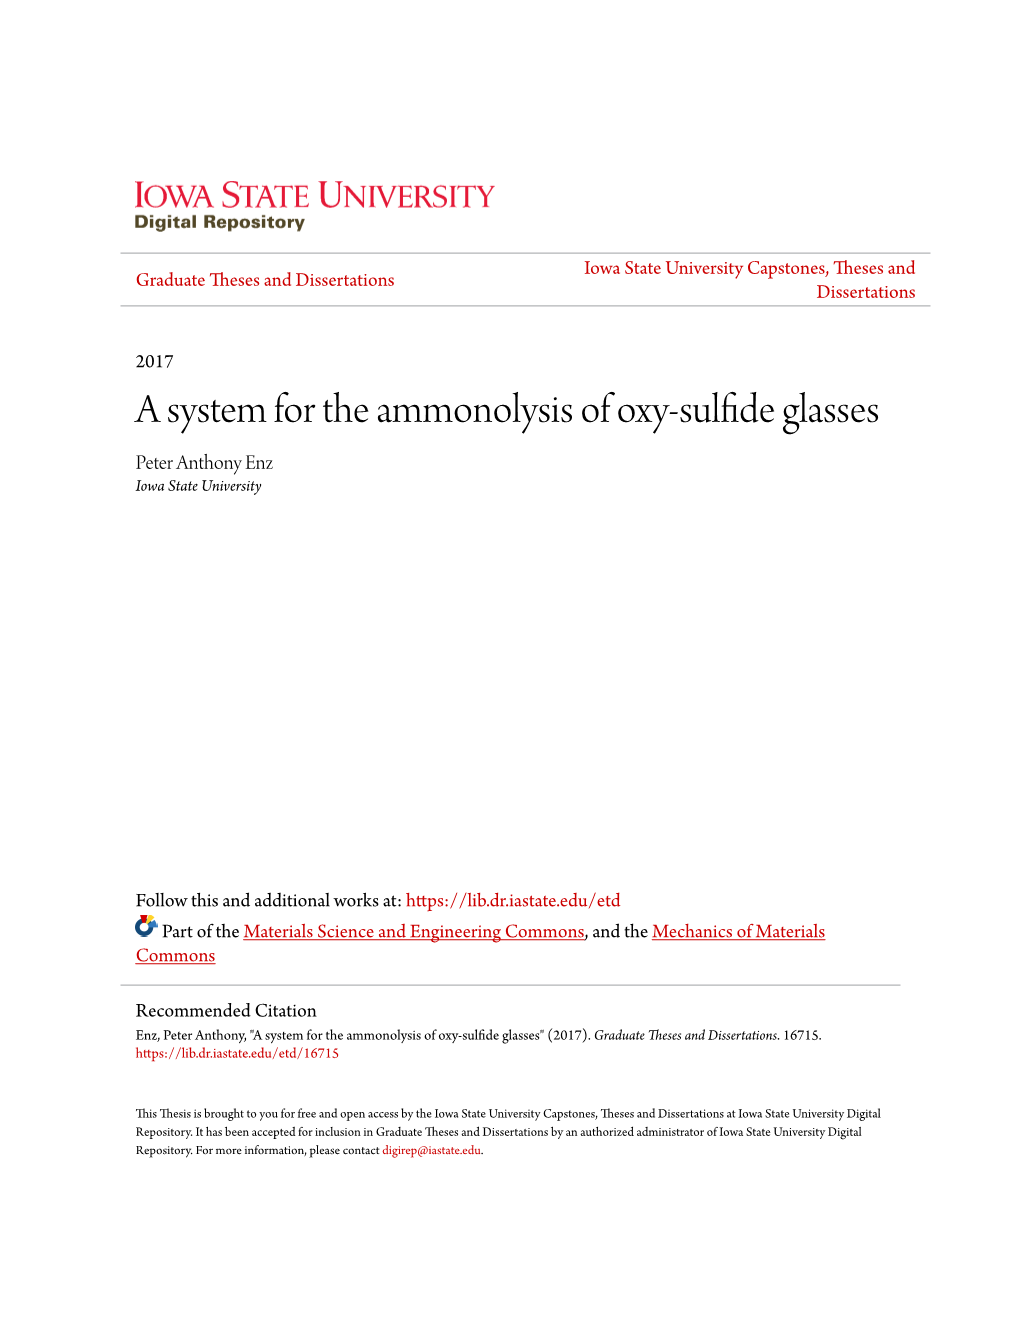 A System for the Ammonolysis of Oxy-Sulfide Glasses Peter Anthony Enz Iowa State University